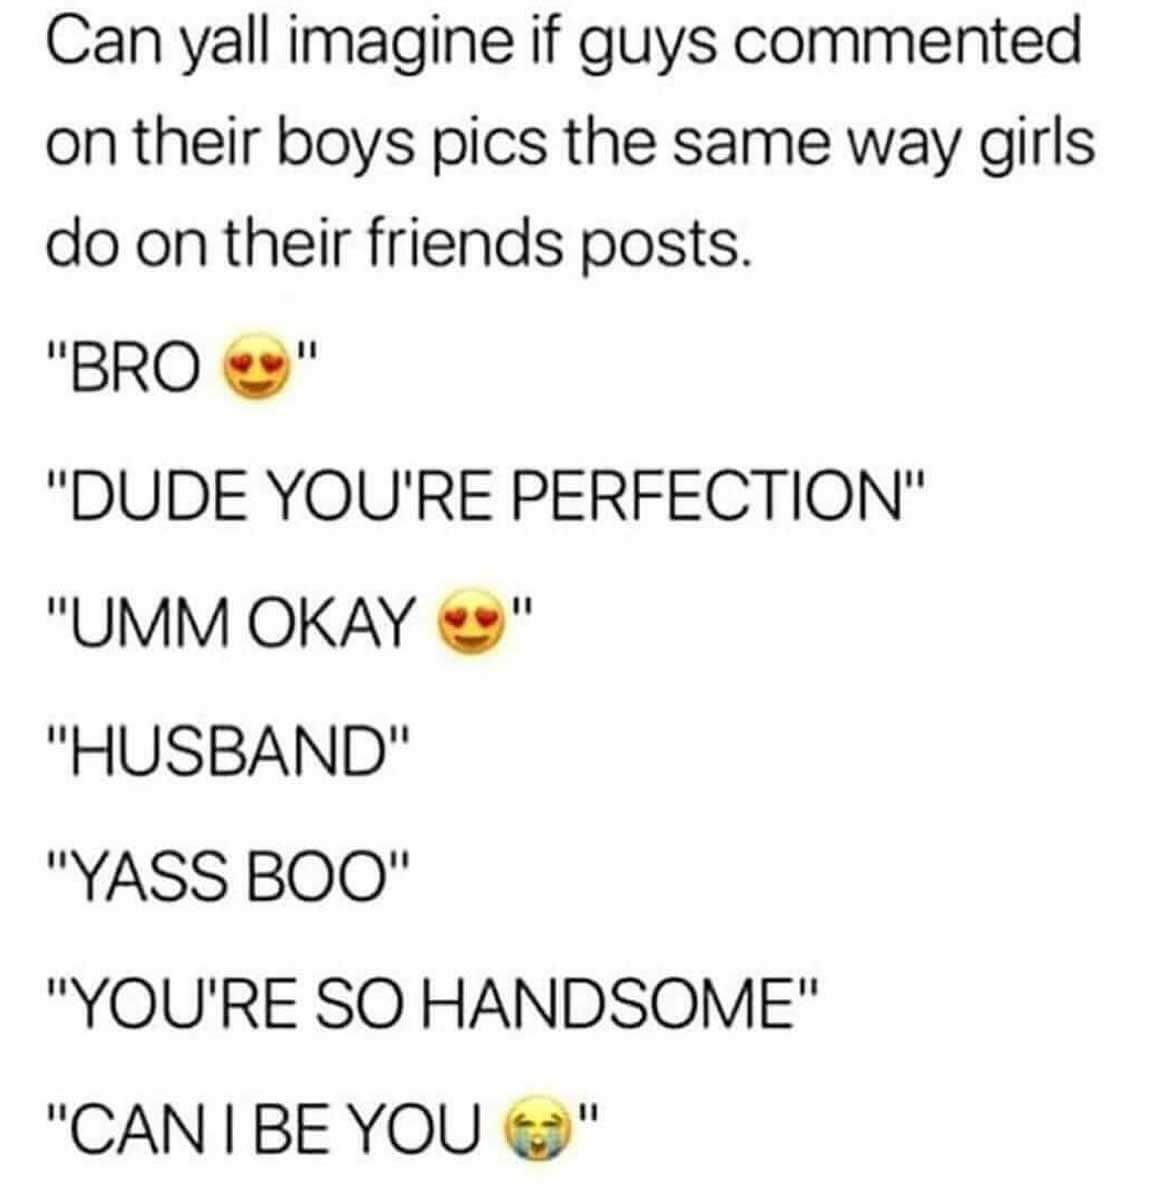 questioning sexuality - Can yall imagine if guys commented on their boys pics the same way girls do on their friends posts. "Bro " "Dude You'Re Perfection" "Umm Okay " "Husband" "Yass Boo" "You'Re So Handsome" "Can I Be You "